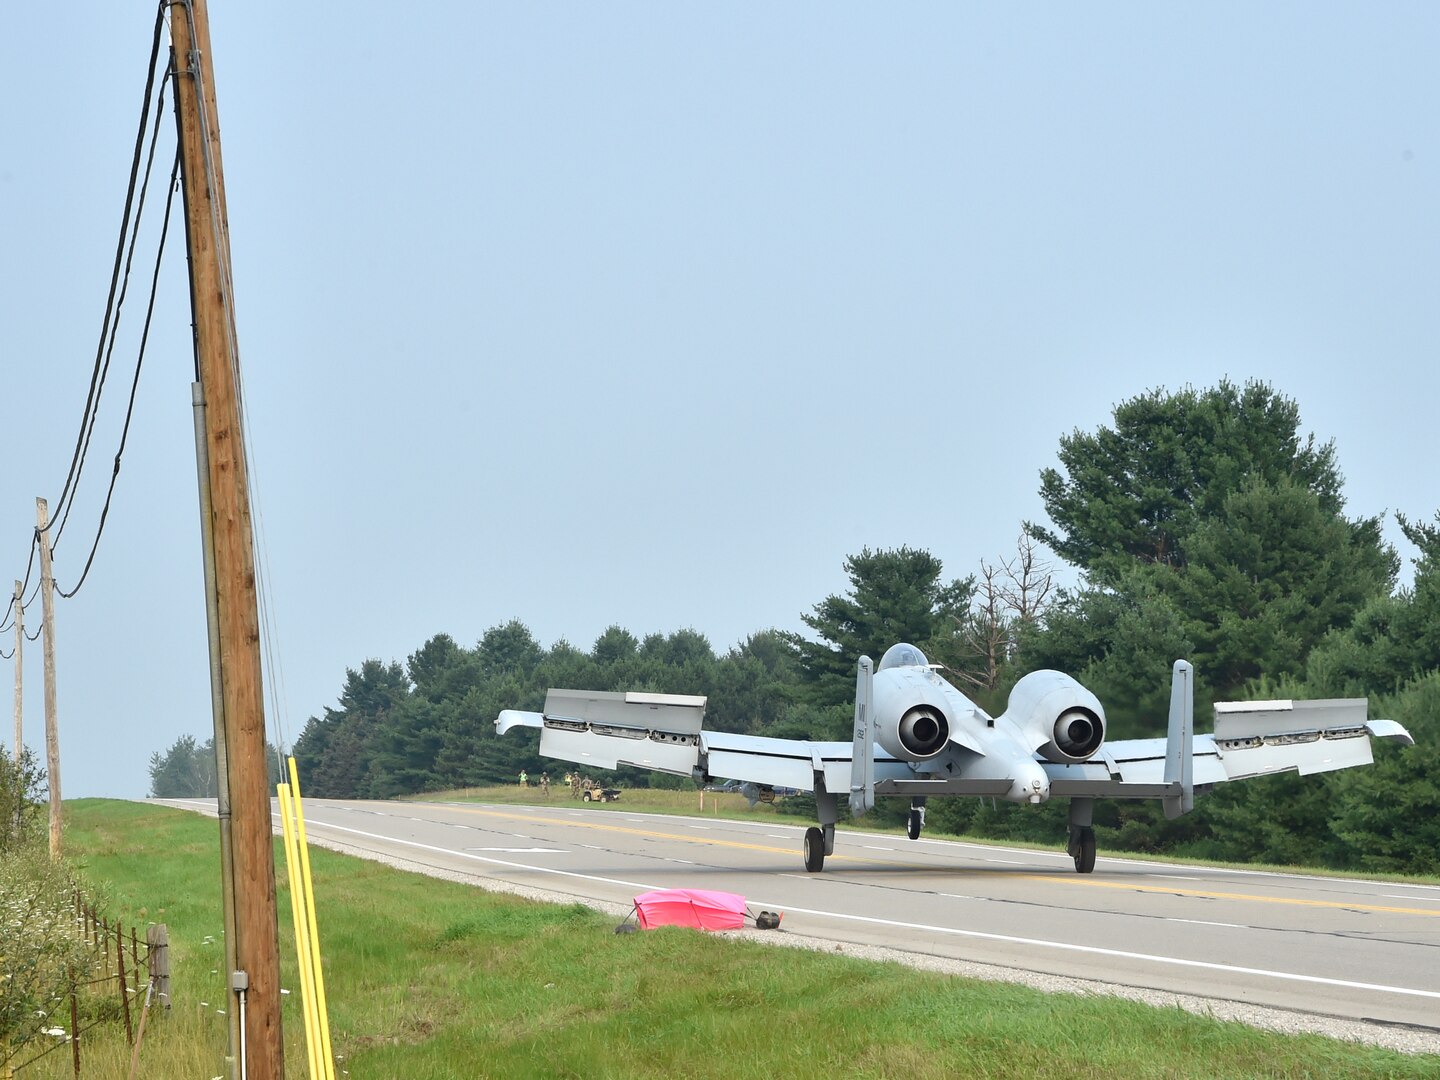 An A-10 Thunderbolt II pilot, 127th Wing, Selfridge Air National Guard Base, taxis down a public highway after landing Aug. 5, 2021. The training event marked the first time a modern military aircraft landed on a U.S. public highway designed only for automobiles.